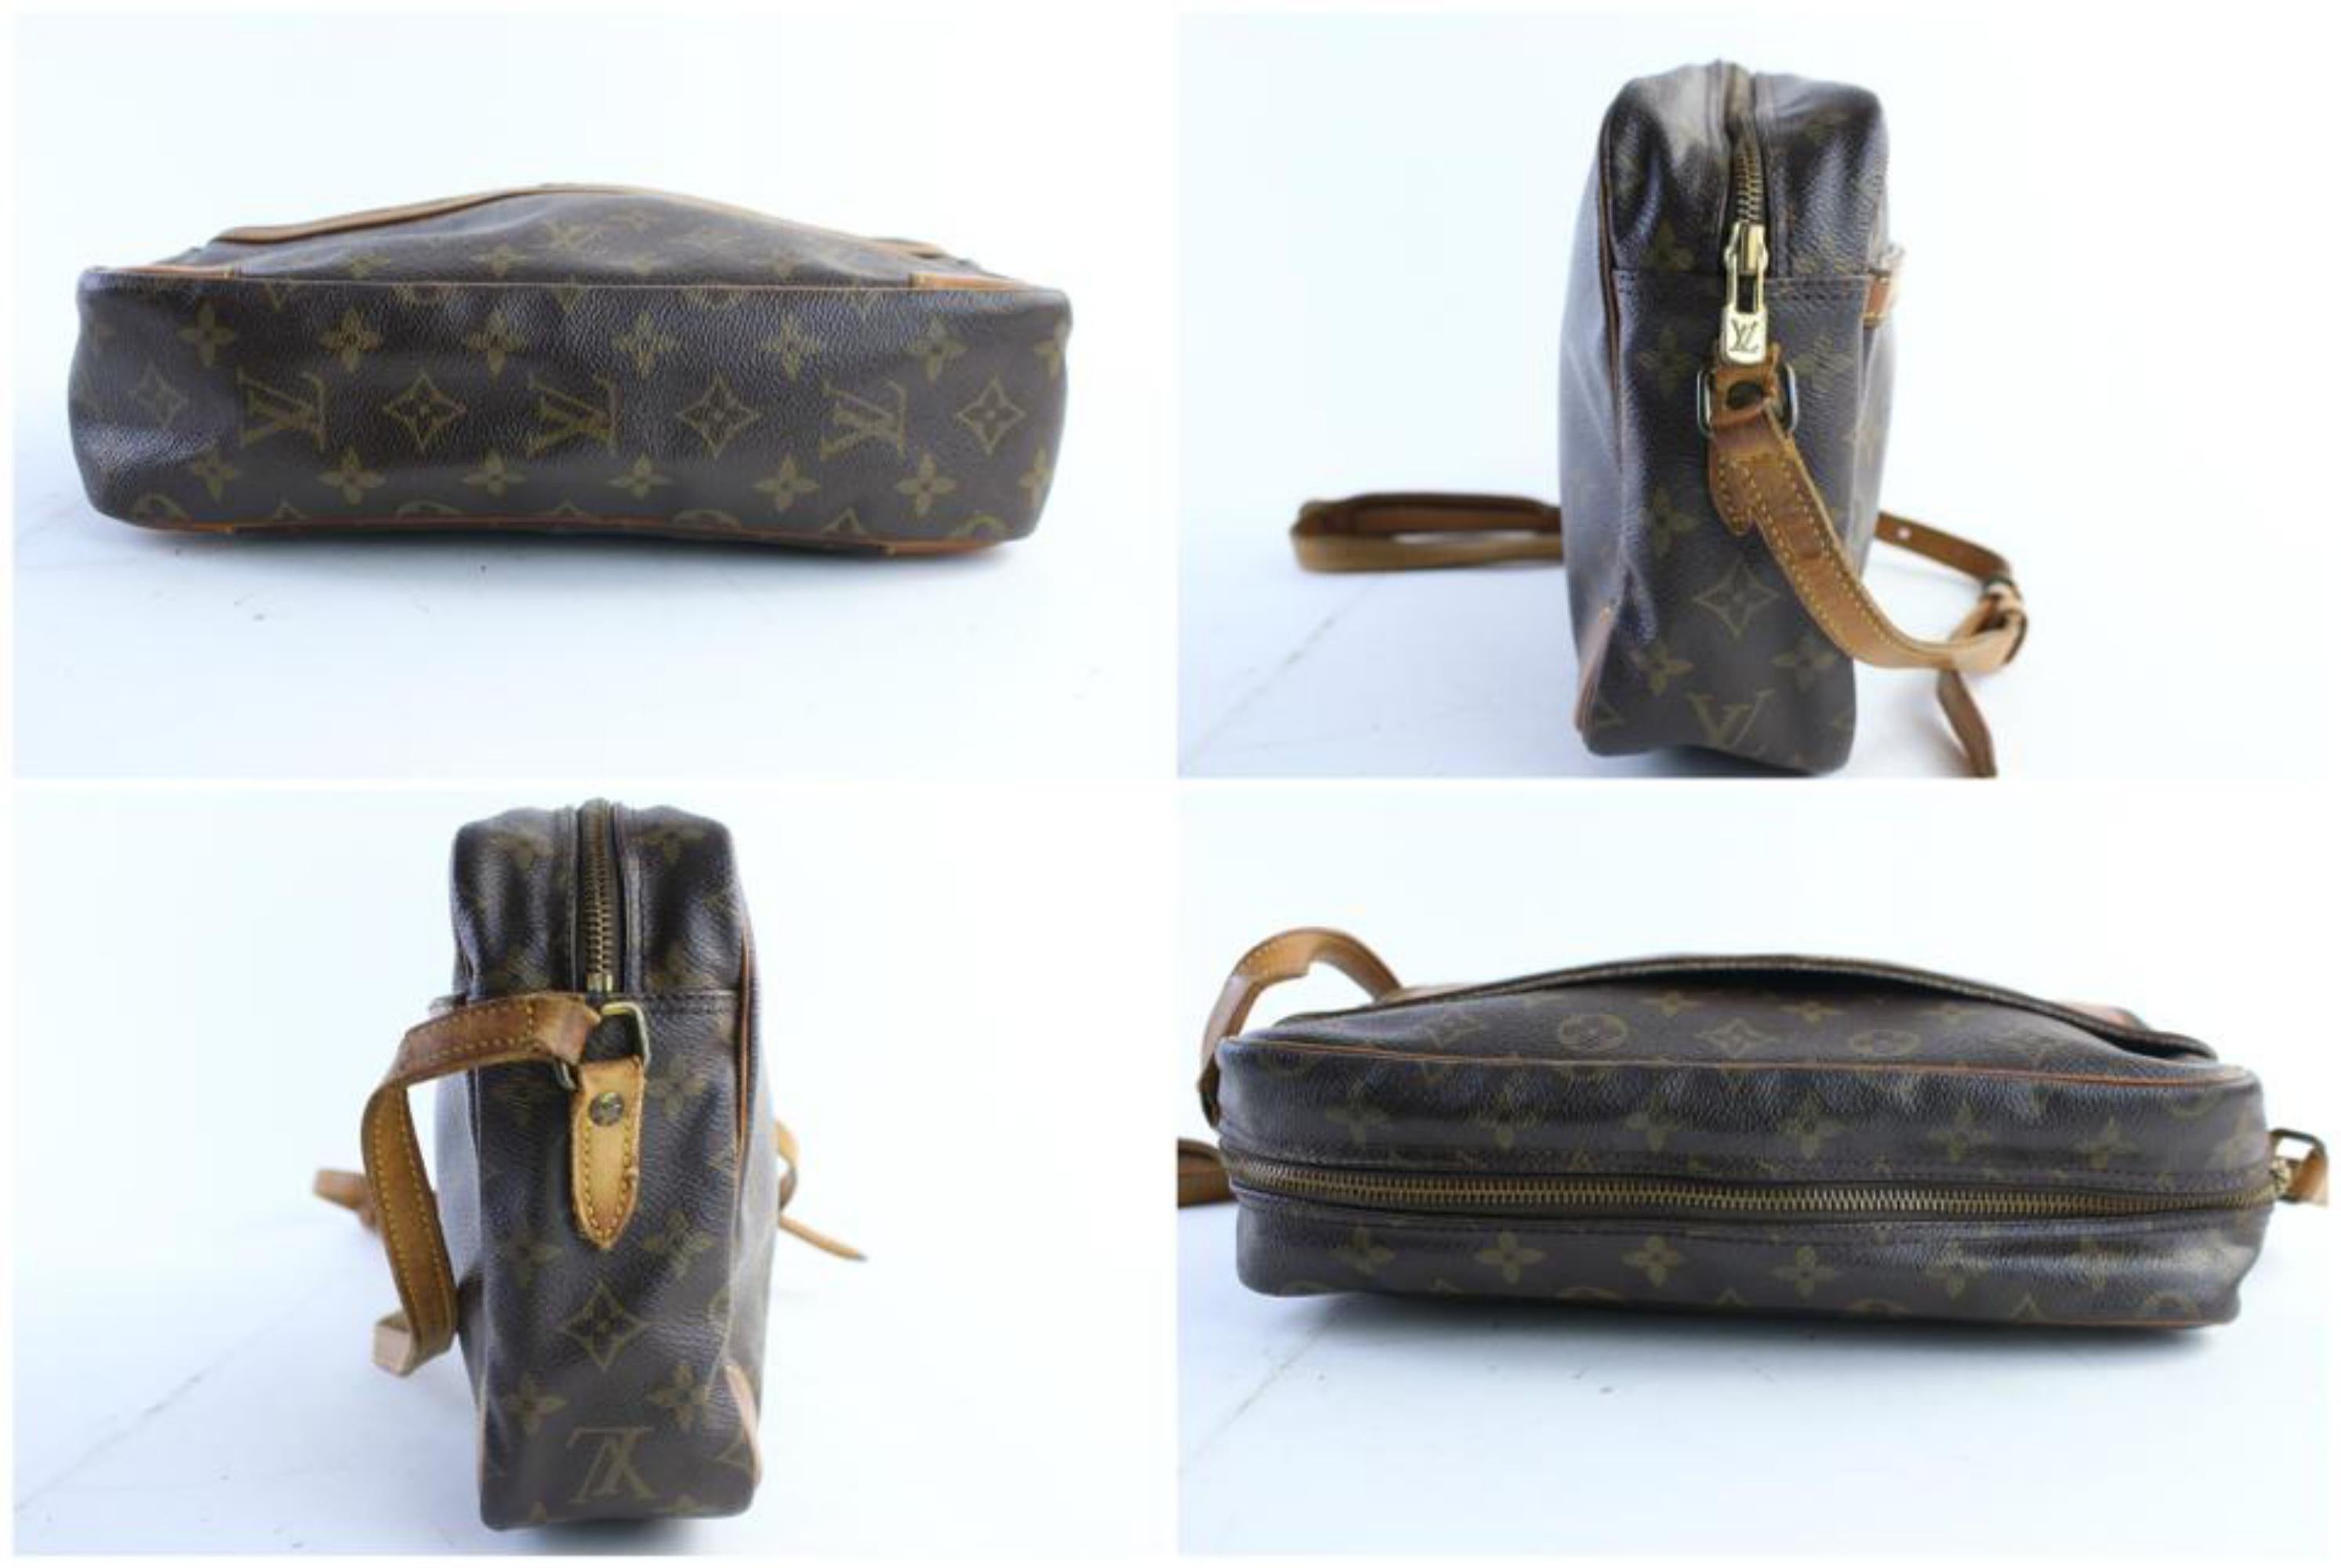 Louis Vuitton Monogram Trocadero 28 2lz0626 Brown Coated Canvas Cross Body Bag In Fair Condition For Sale In Forest Hills, NY